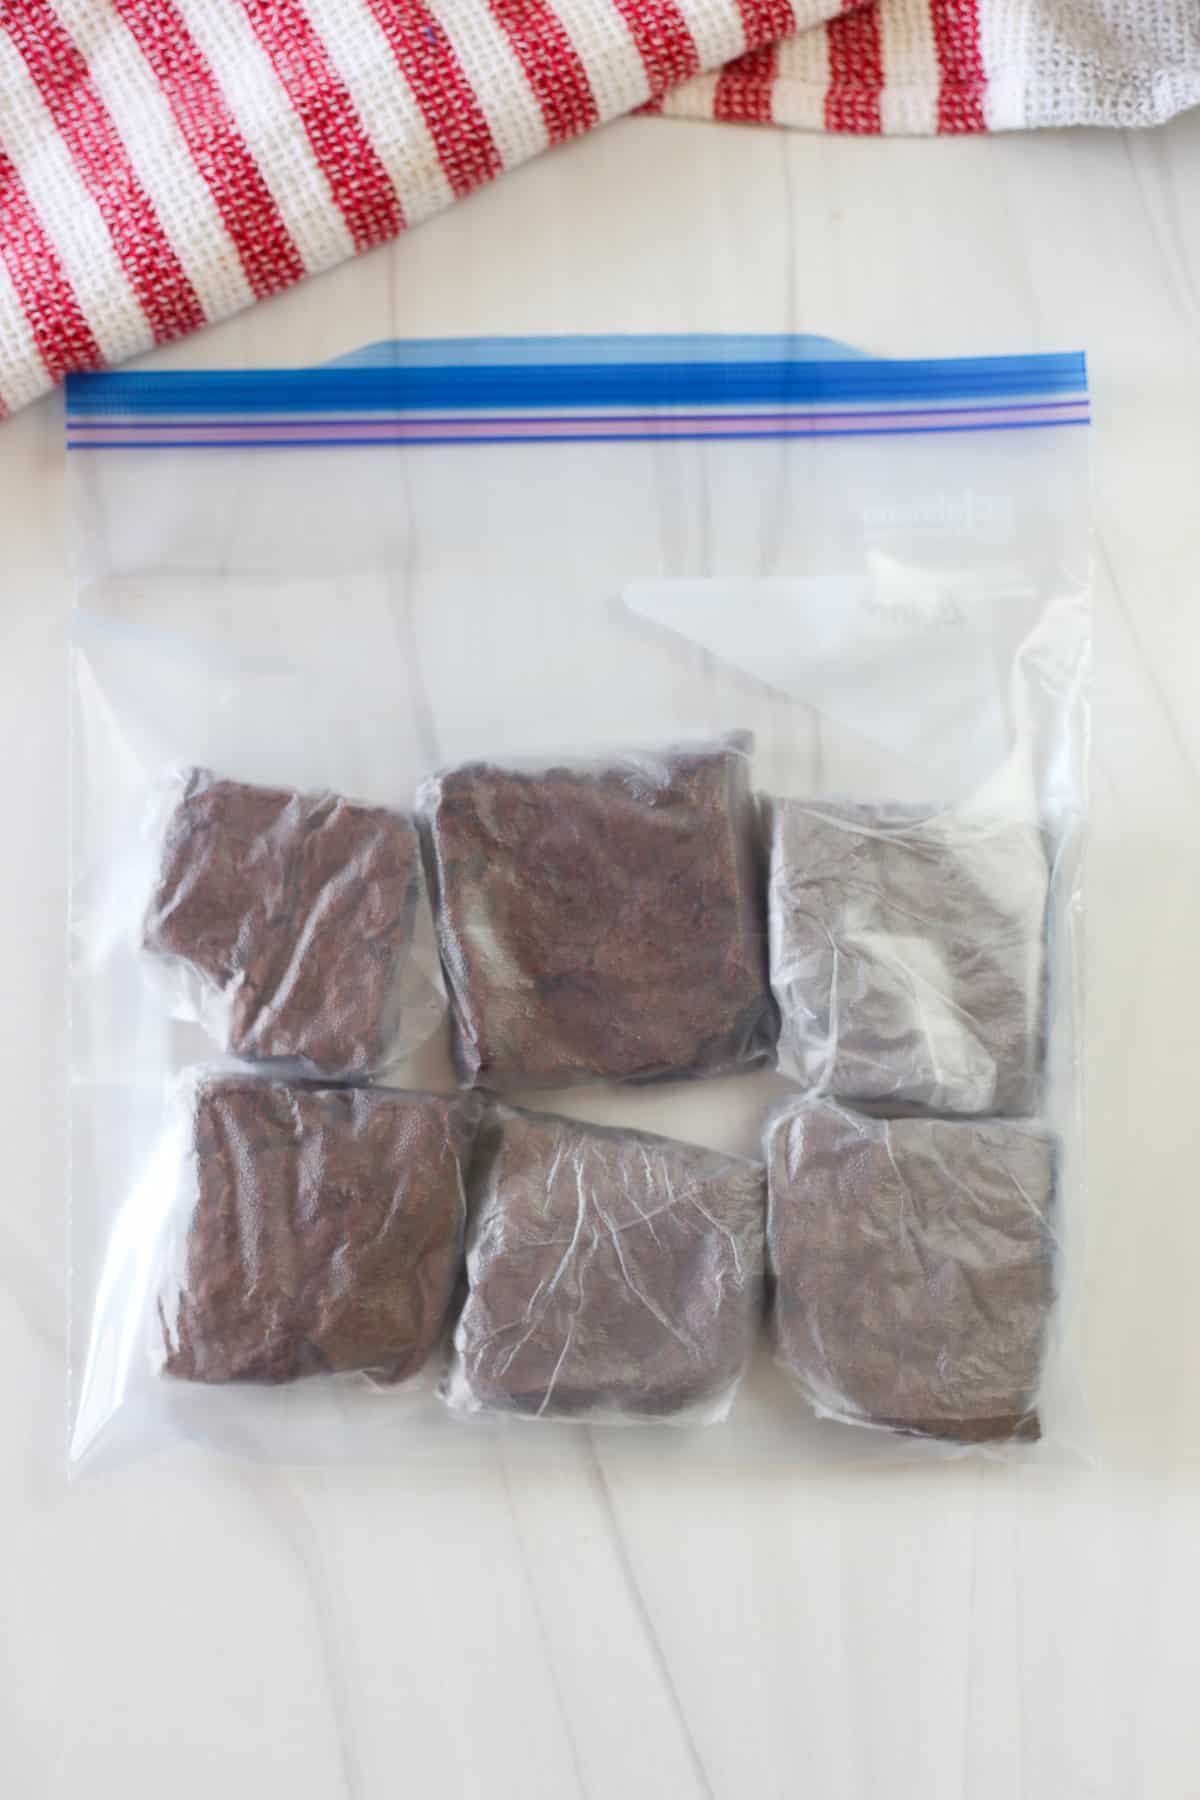 Cooked brownies wrapped in wax paper inside a freezer bag.